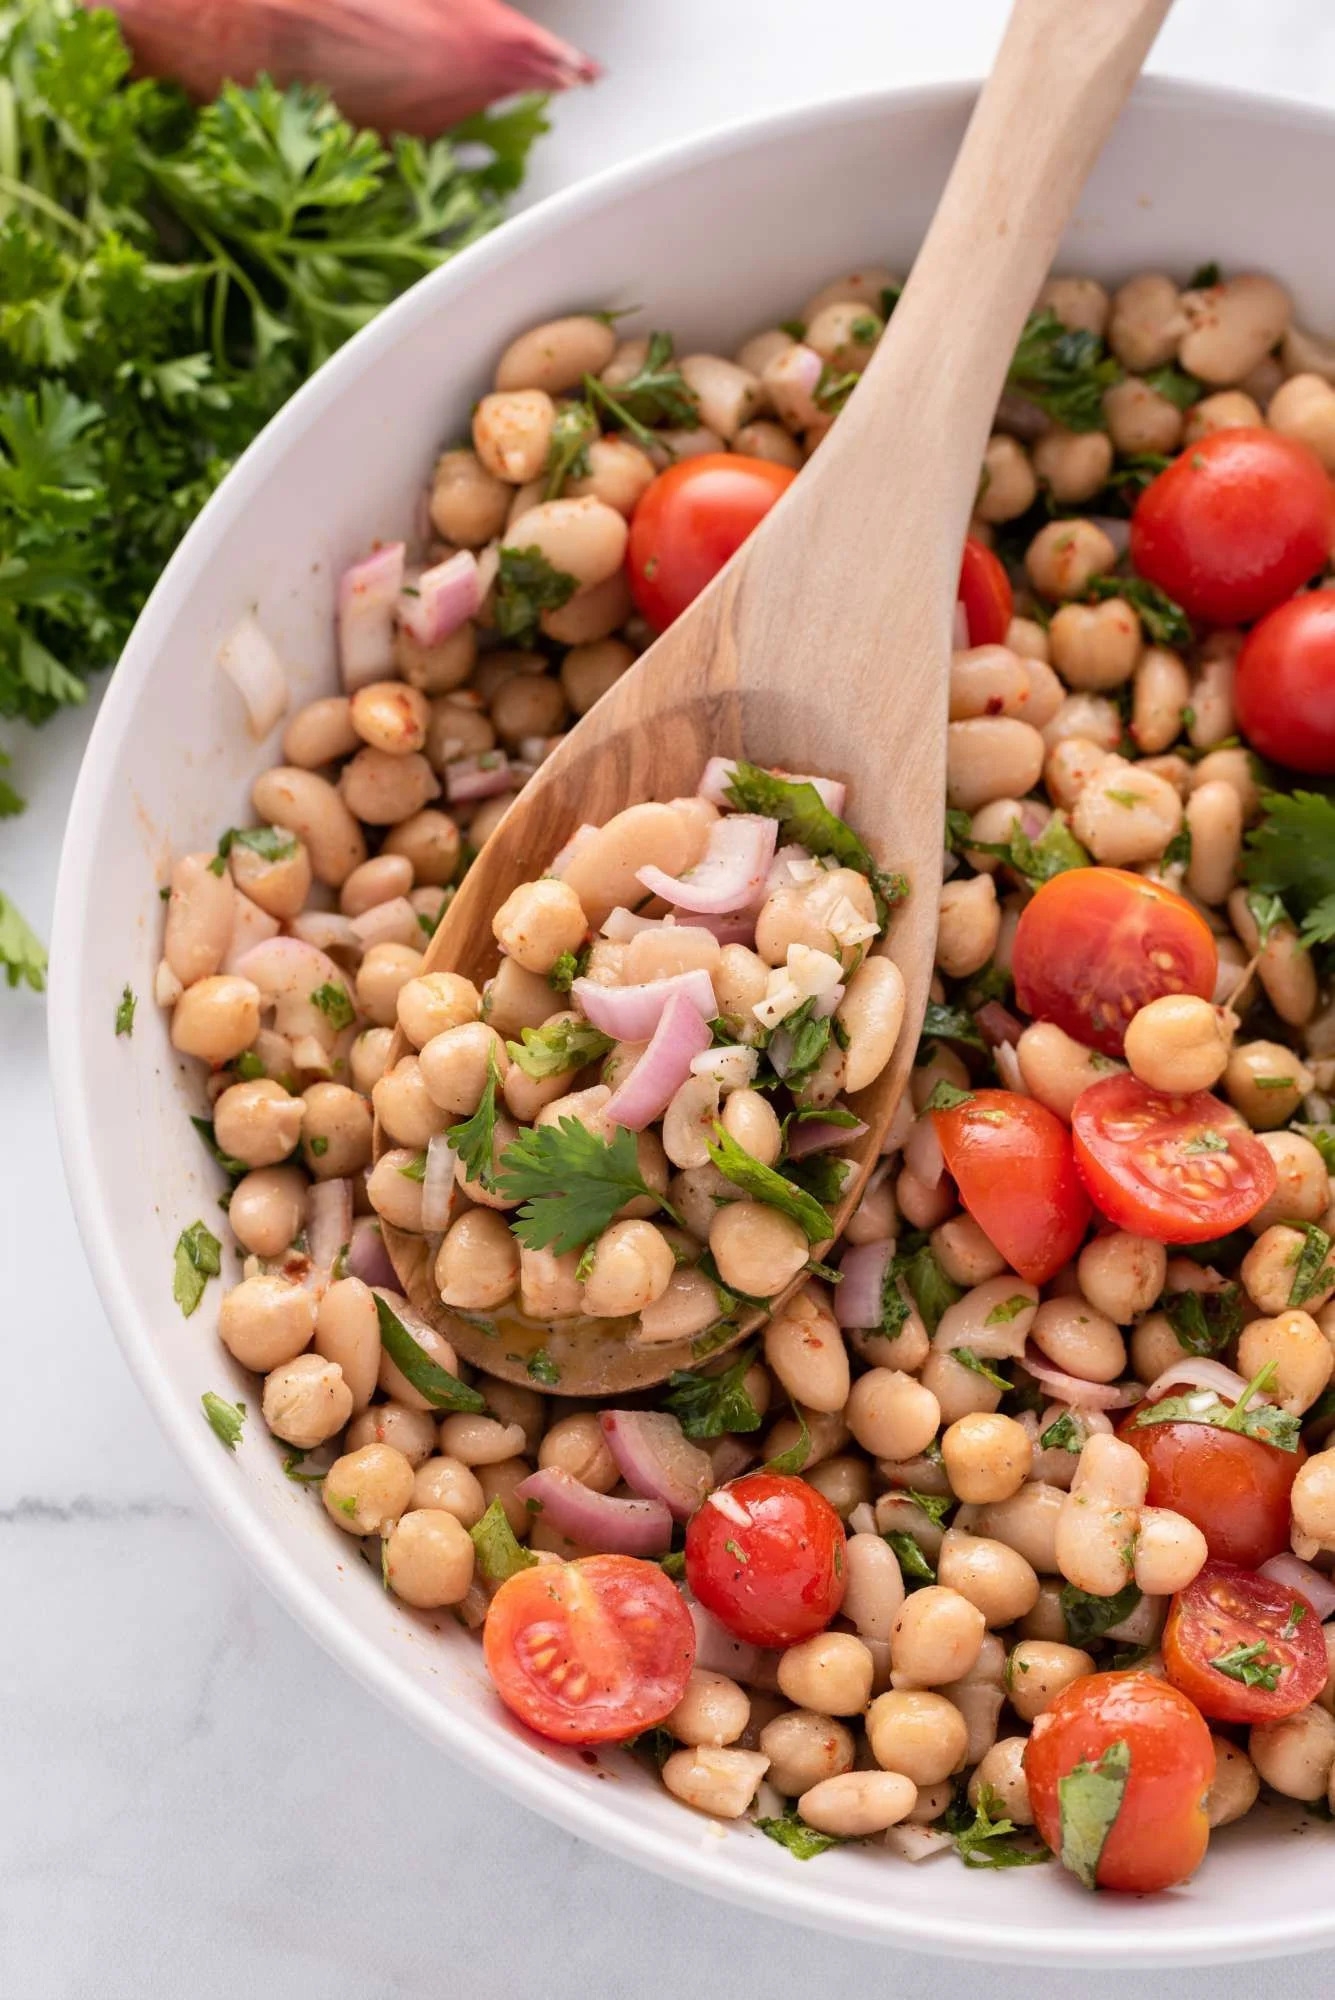 Marinated bean salad with chickpeas, white beans, herbs, tomatoes, and shallots.